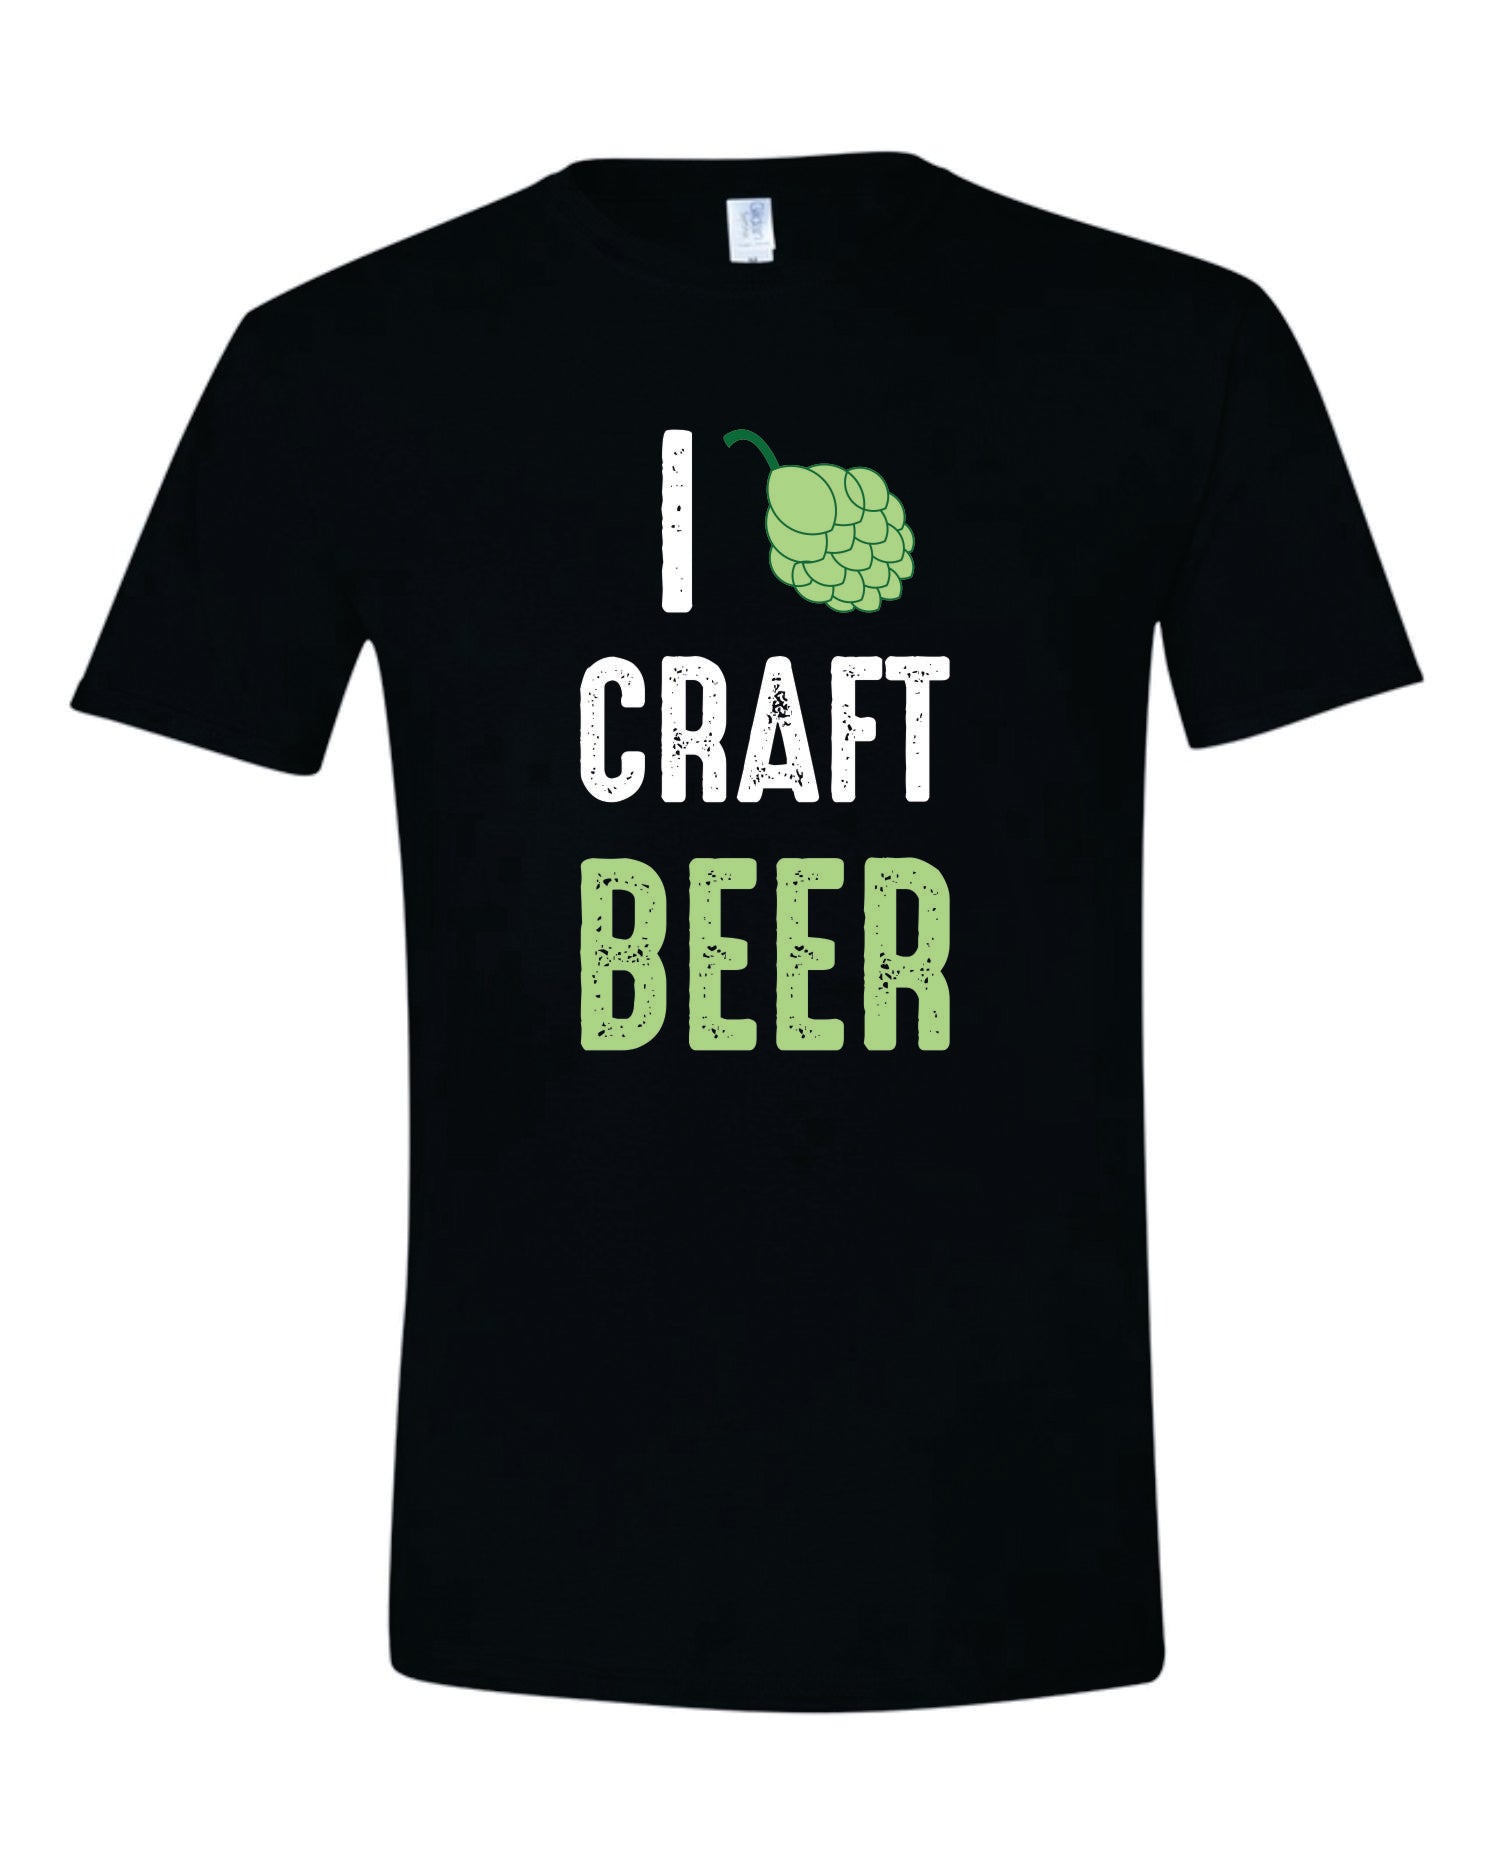 I Love Craft Beer - Enthusiast's Choice T-Shirt